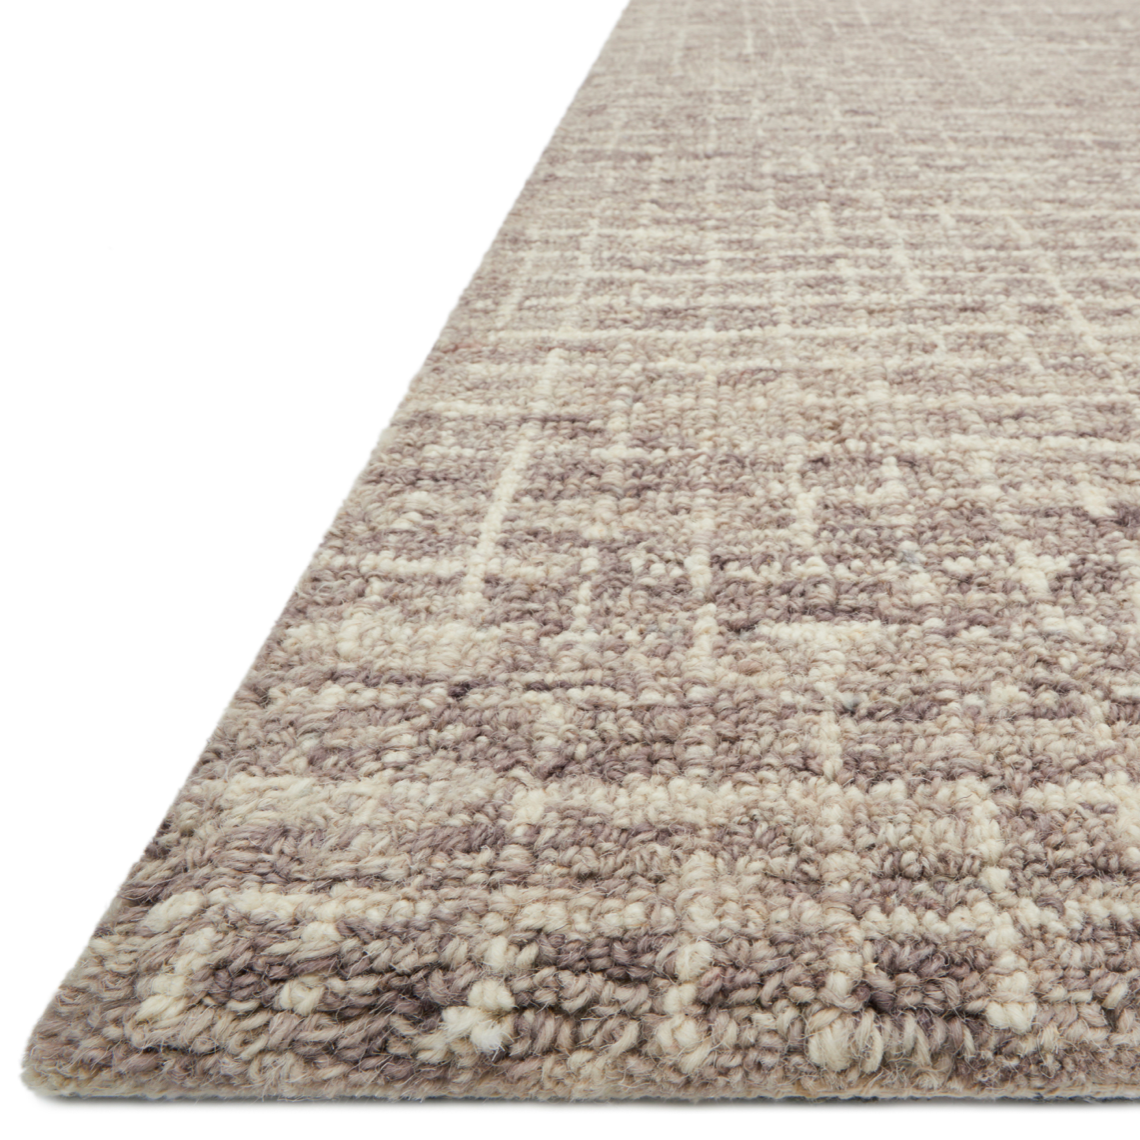 Inspired by textural watercolors, the Giana Smoke Area Rug combines a relaxed grid with soft variations of smokey creams for an effortless and sophisticated look. Each area rug is hooked of 100% wool by artisans for a beautiful textural layer to your home. The soft textures of this area rug bring warmth and coziness to any room.  Hooked 100% Wool GH-01 Smoke